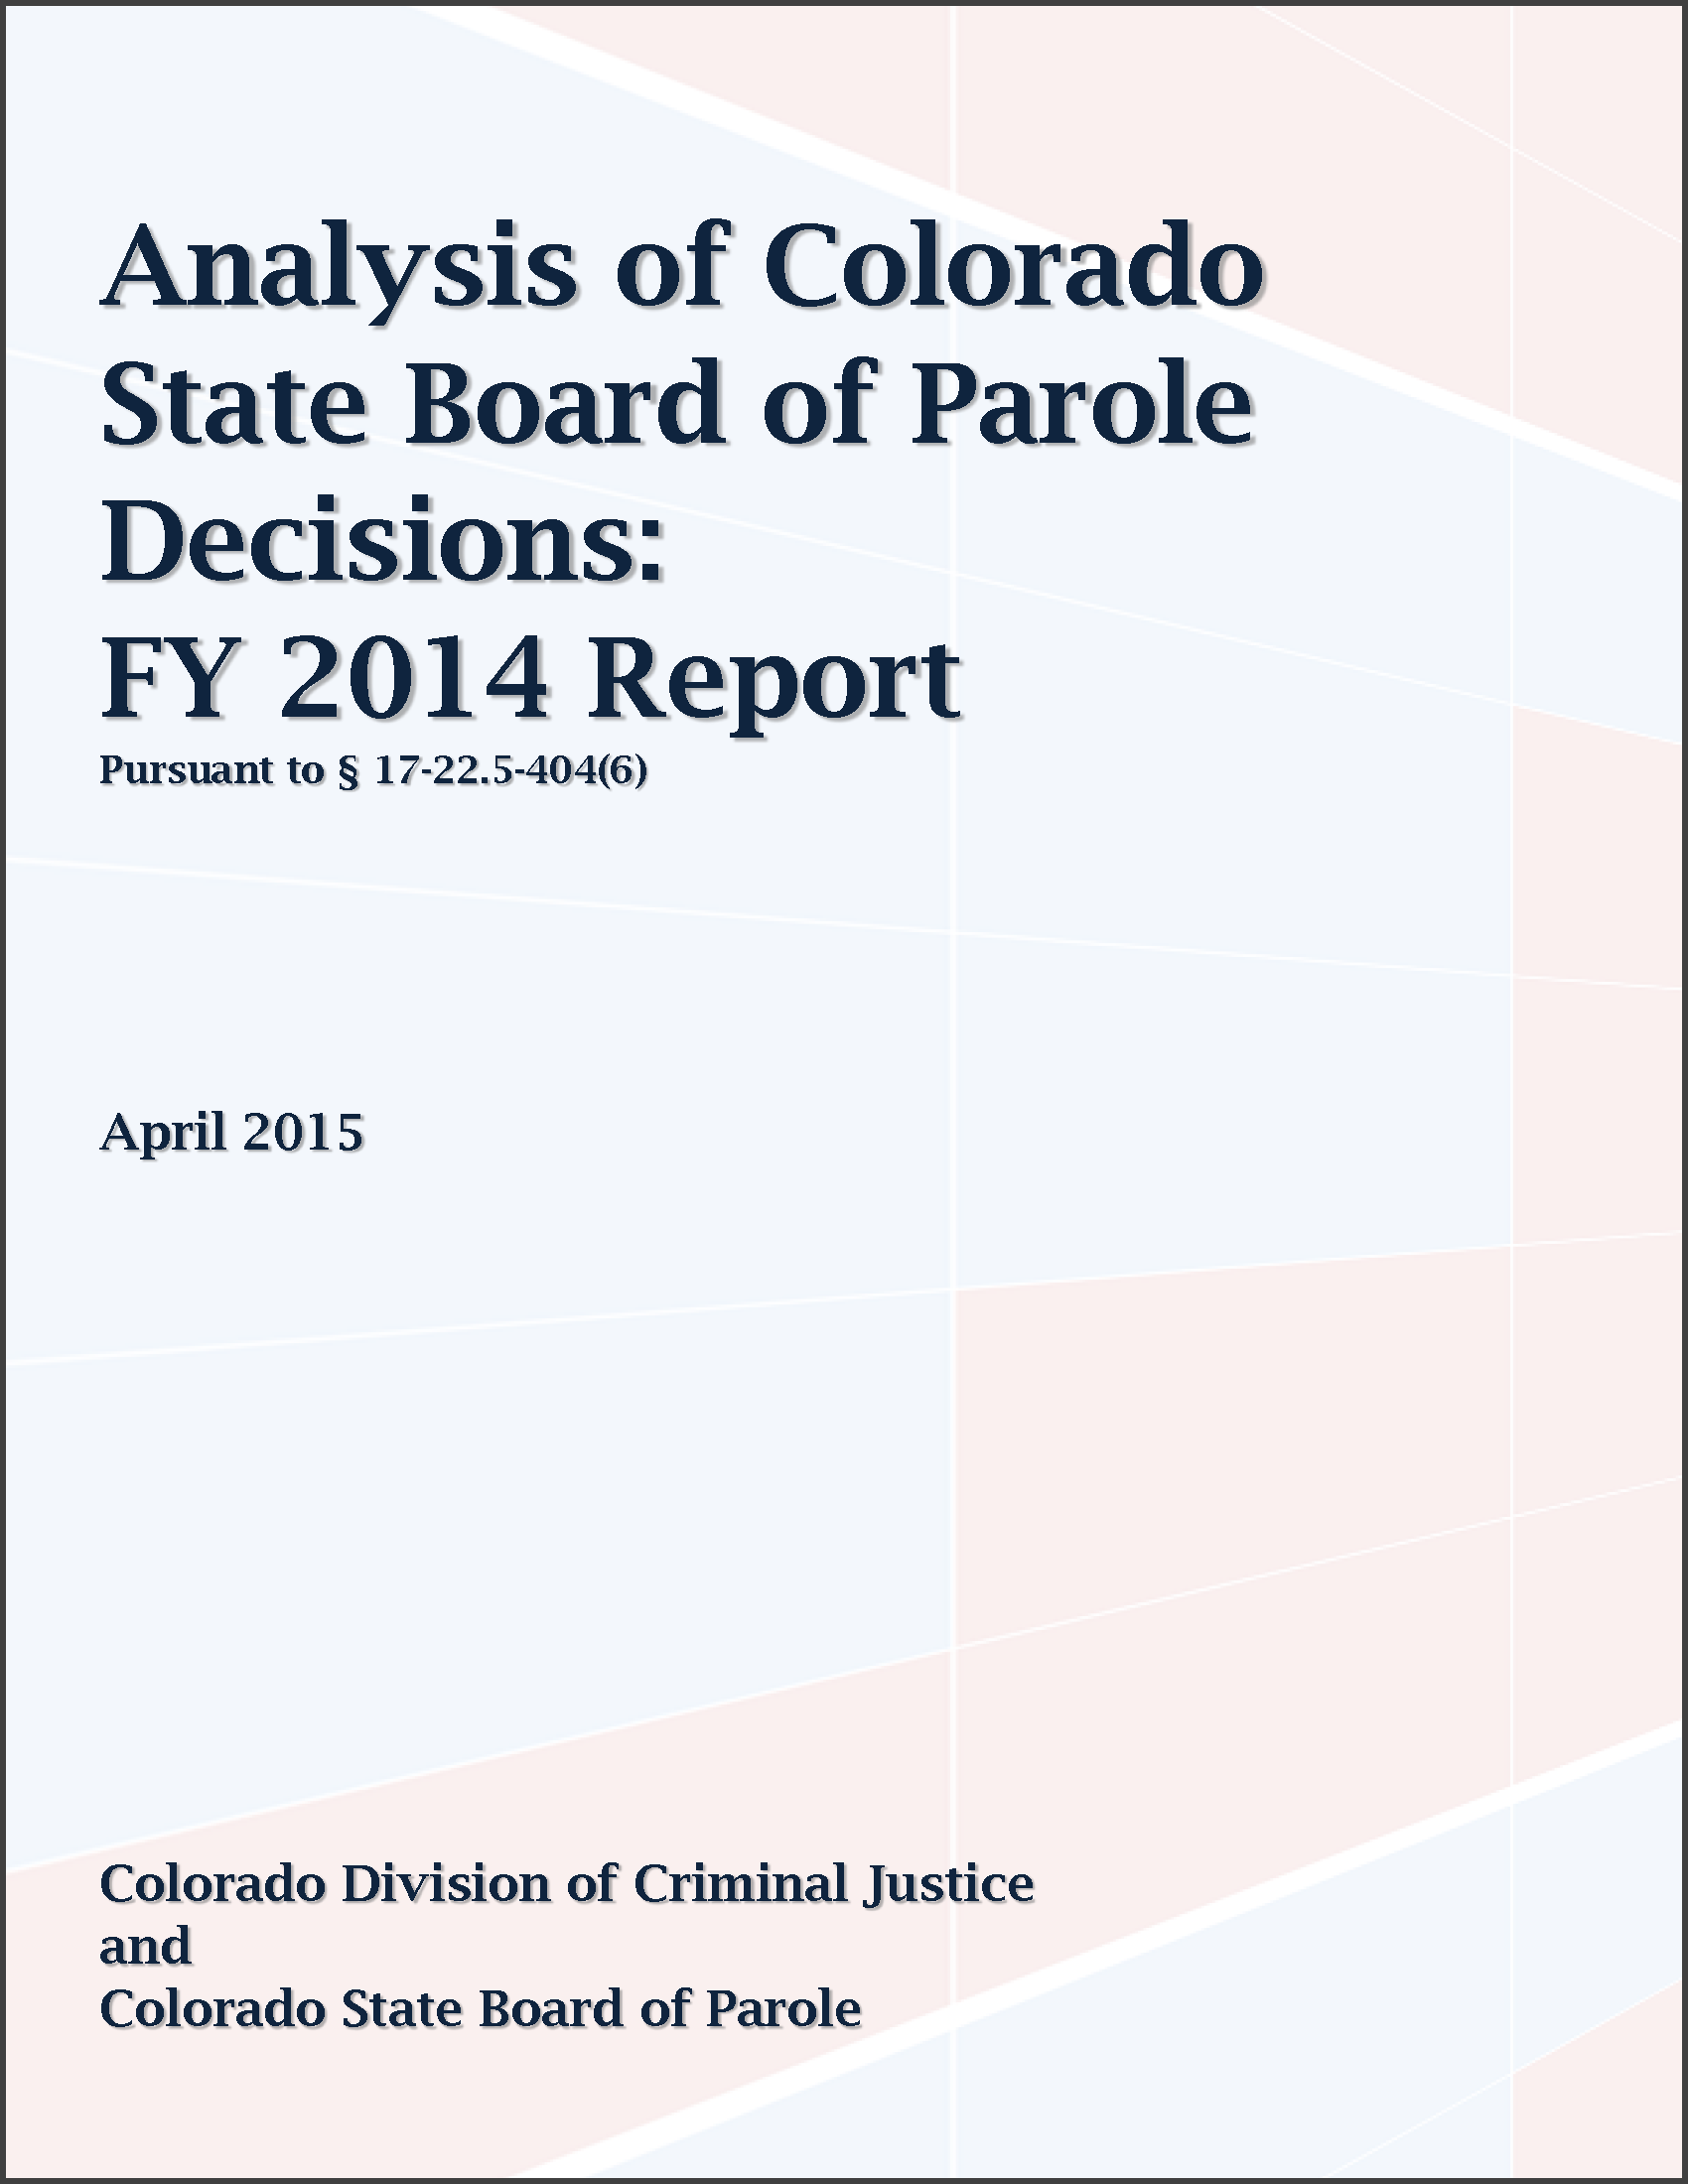 Analysis of Colorado State Board of Parole Decisions: FY 2014 Report (April 2015)